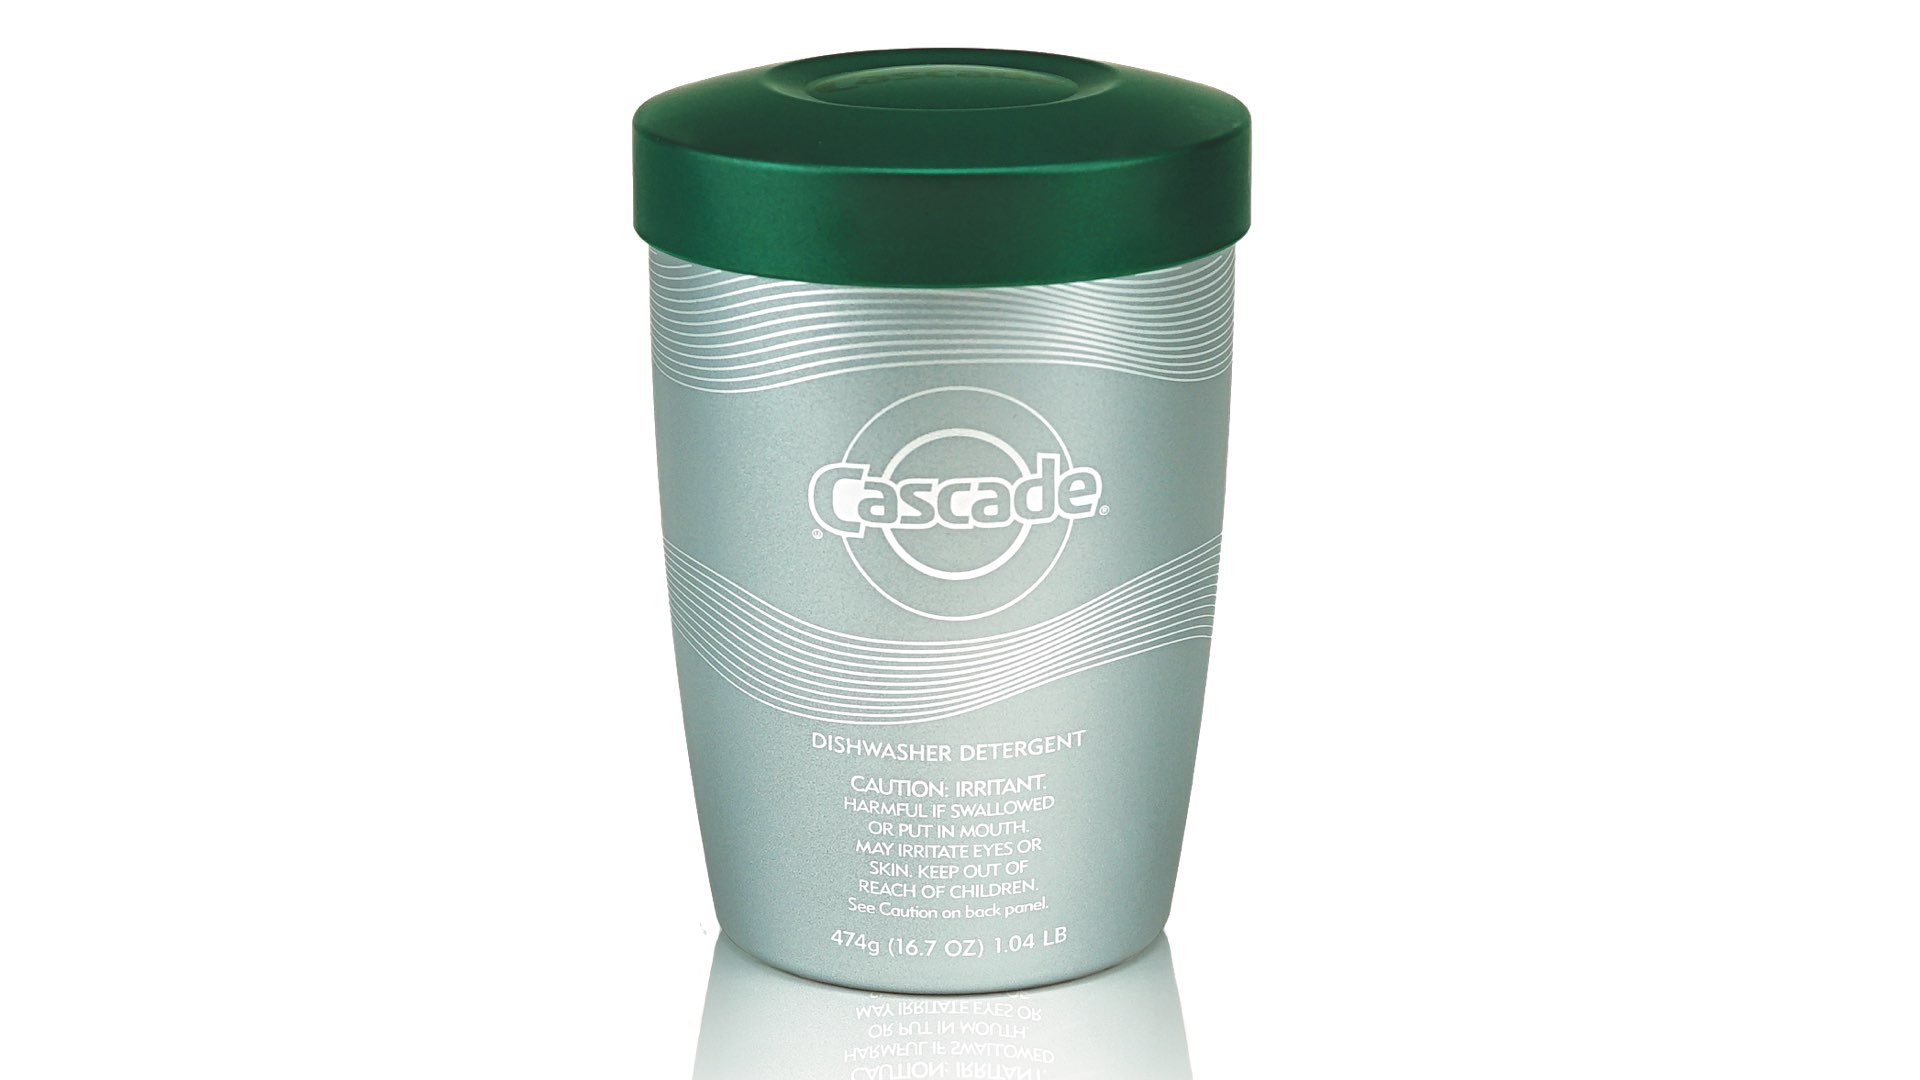 Reusable container of Cascade dishwasher detergent